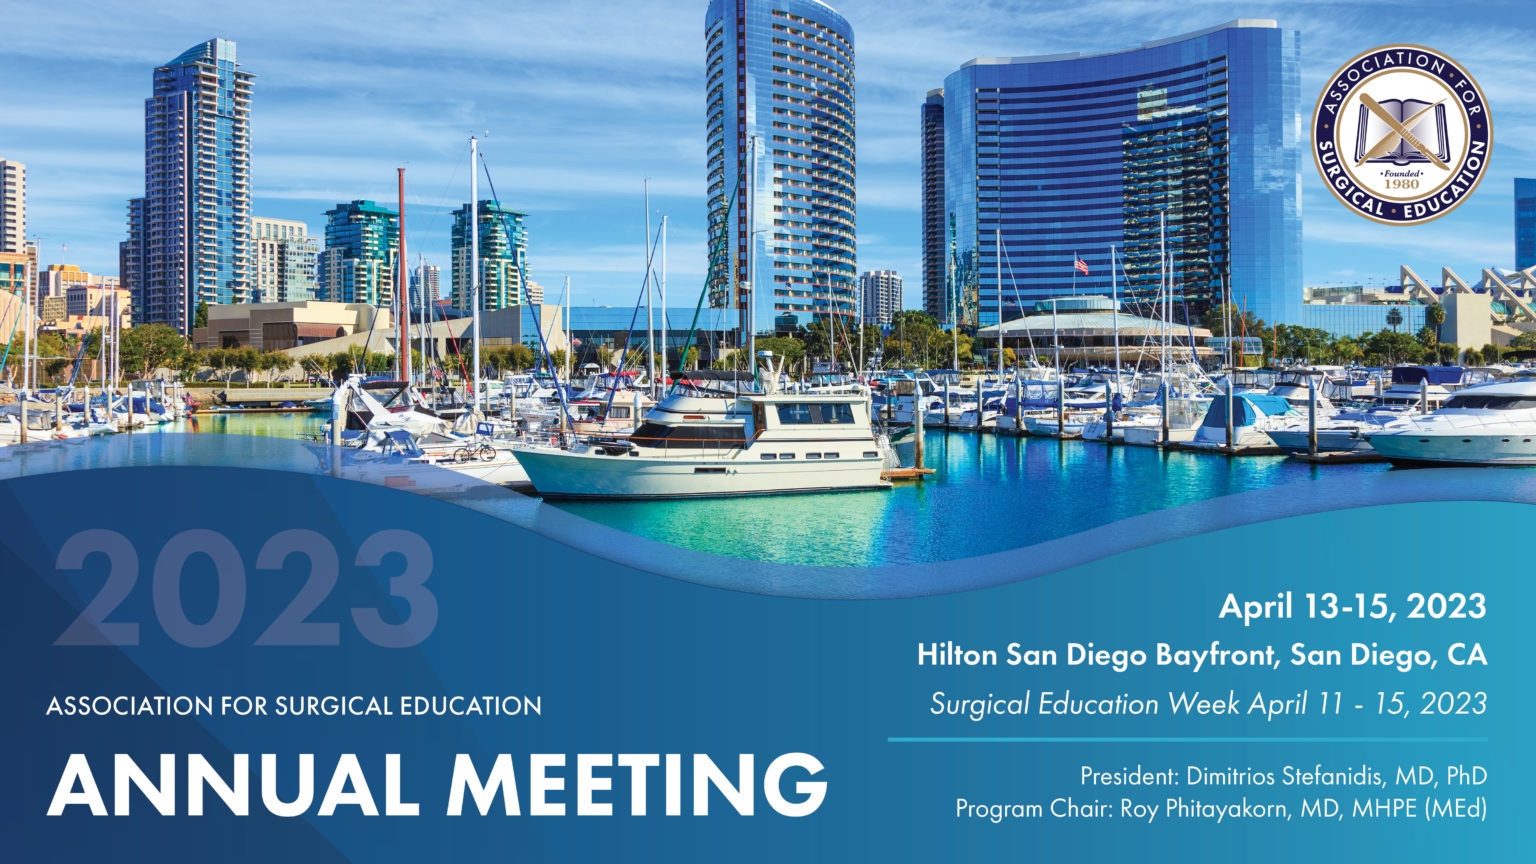 Annual Meeting The Association for Surgical Education